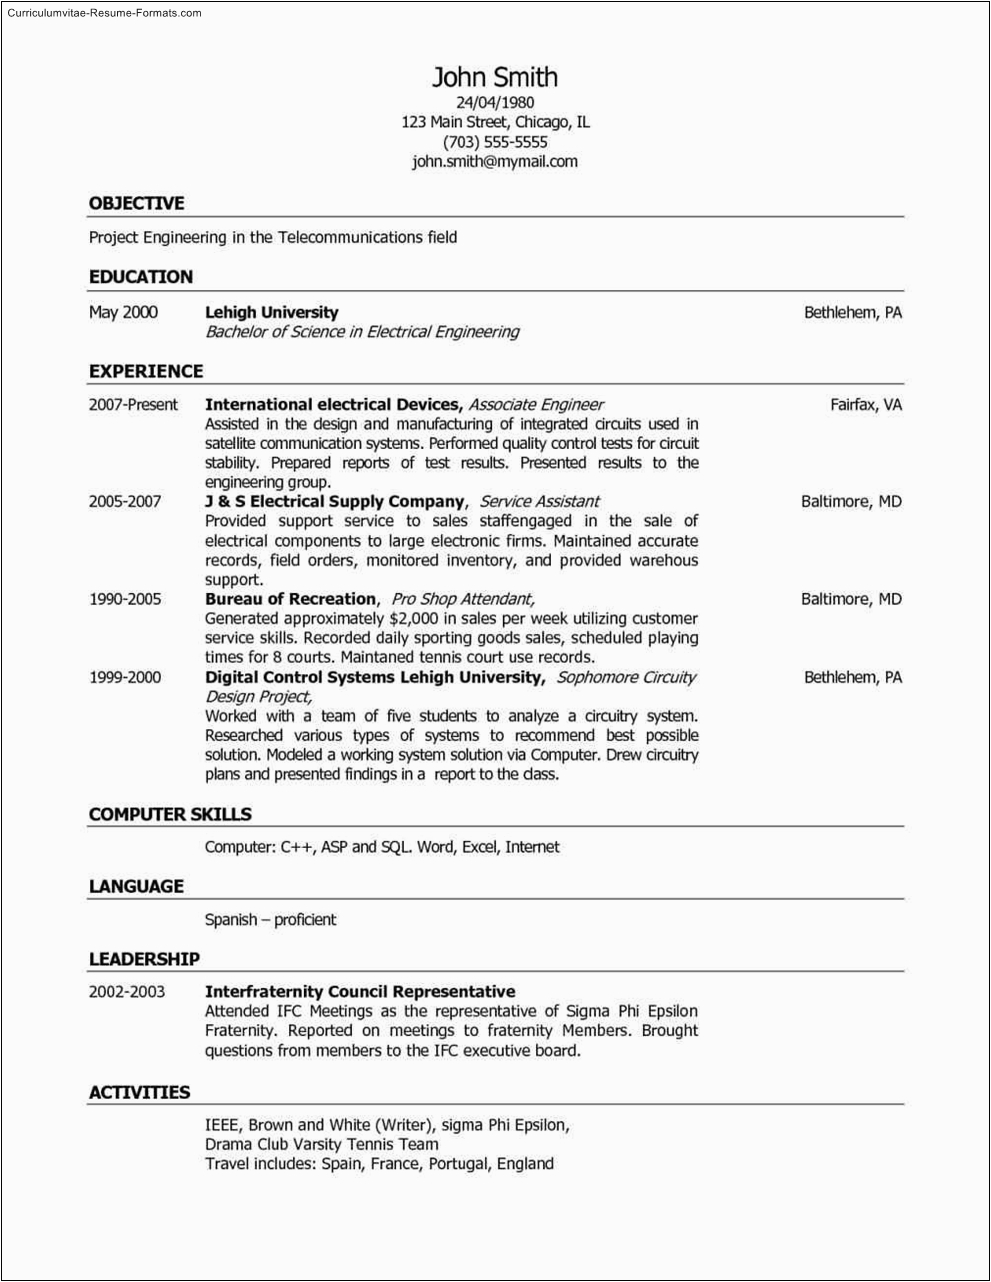 Resume Templates for Customer Service Position Customer Service Resume Template Free